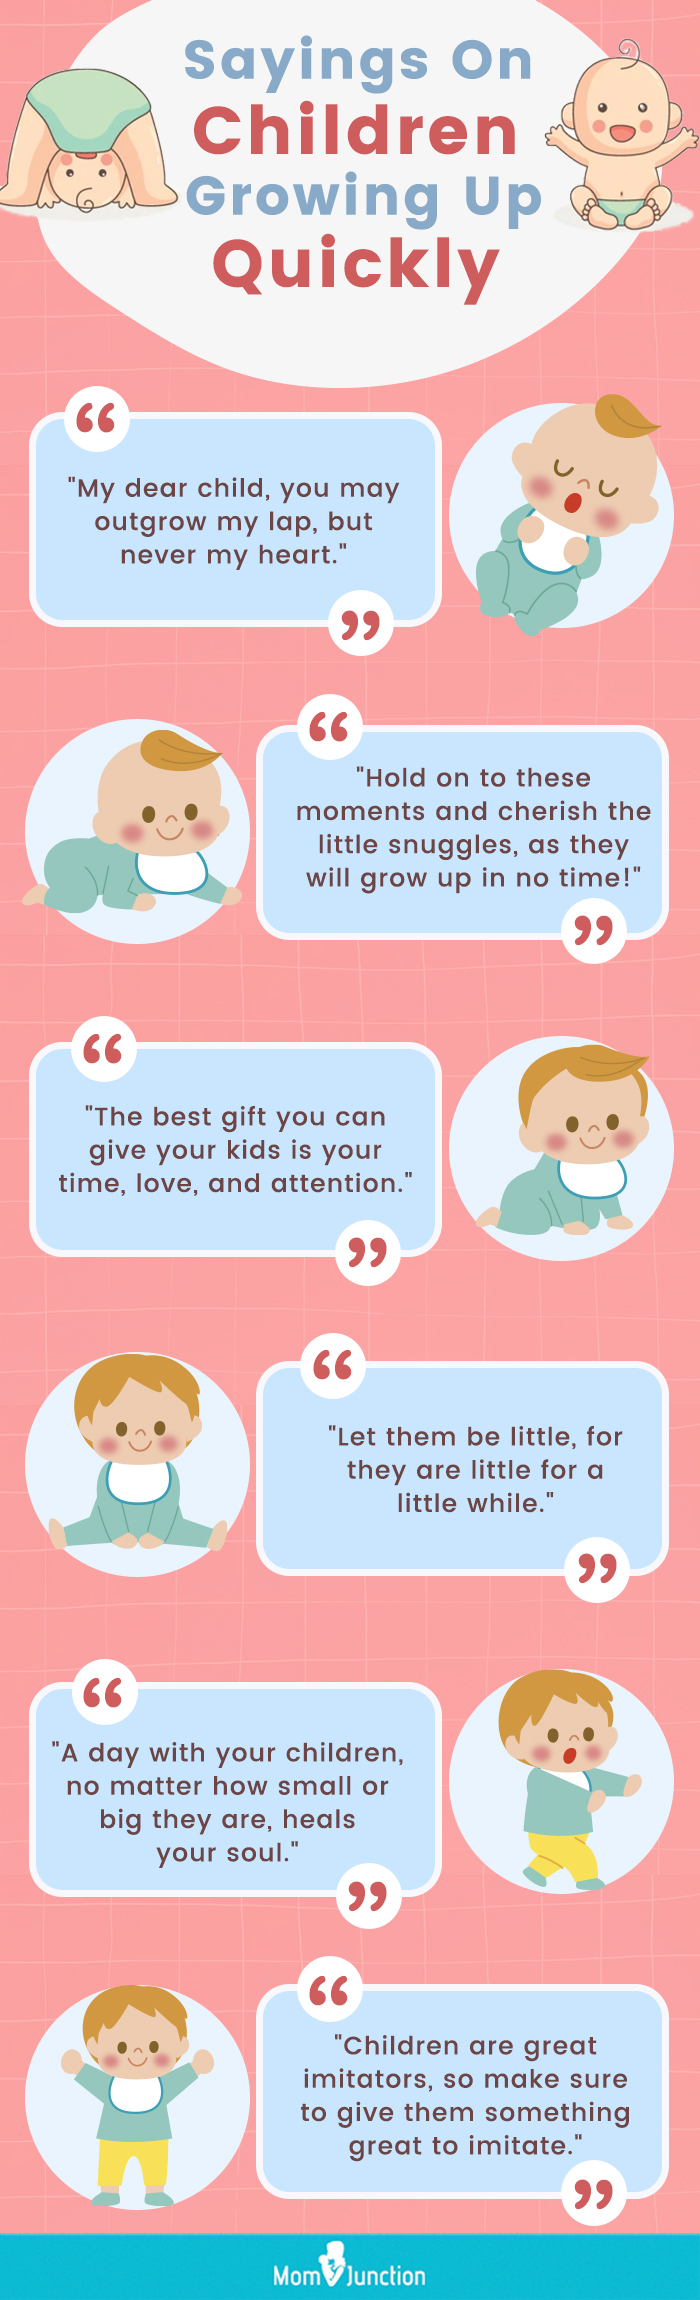 sayings on children growing up quickly [infographic]